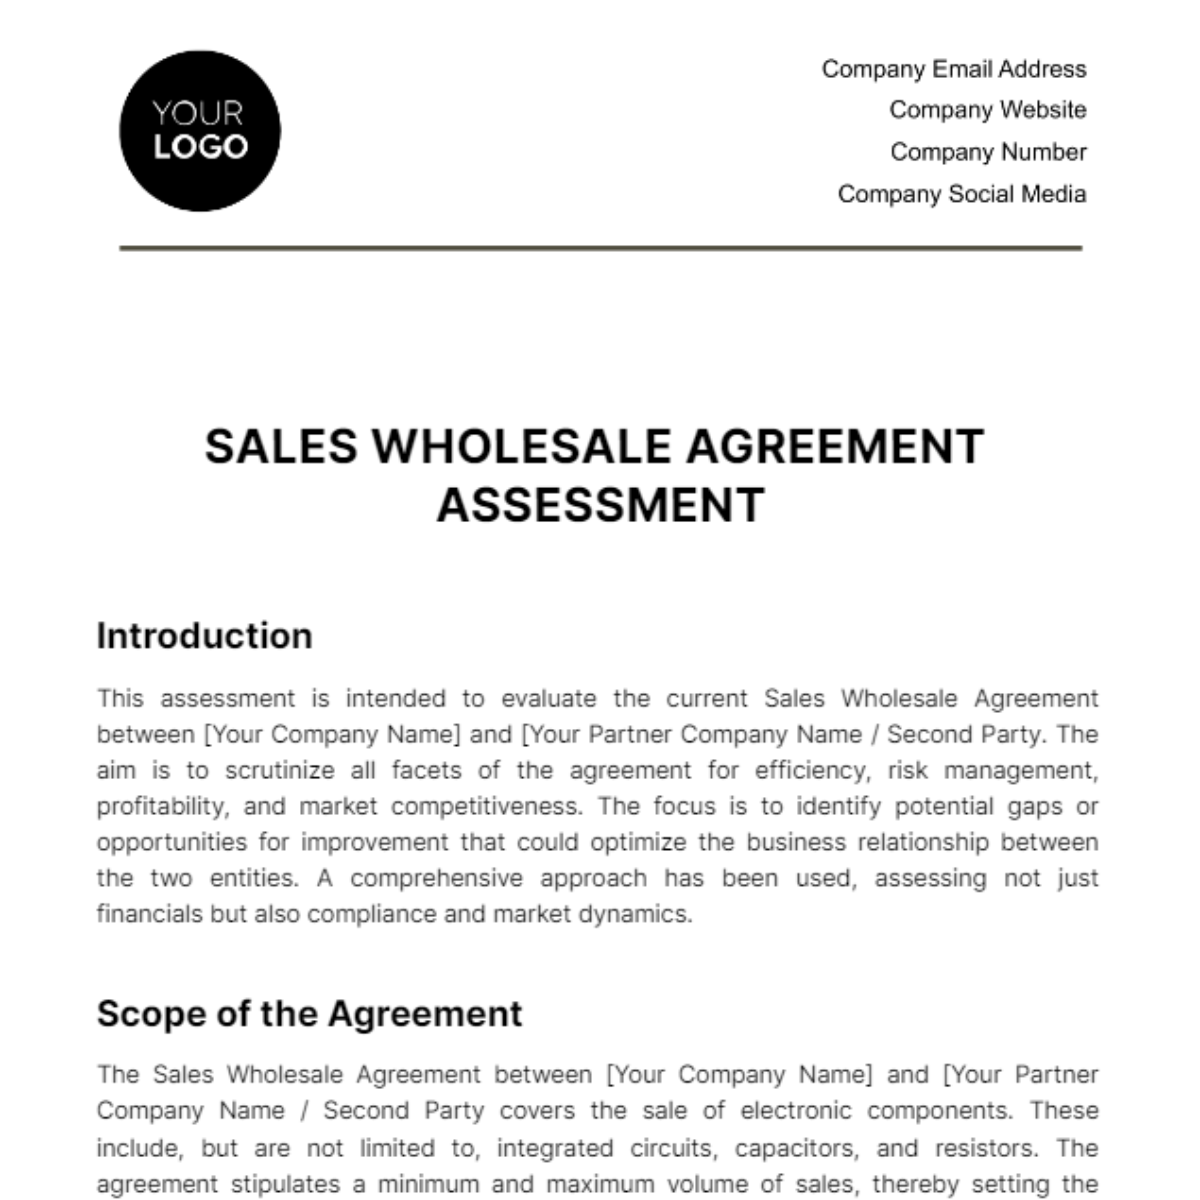 Free Sales Wholesale Agreement Assessment Template